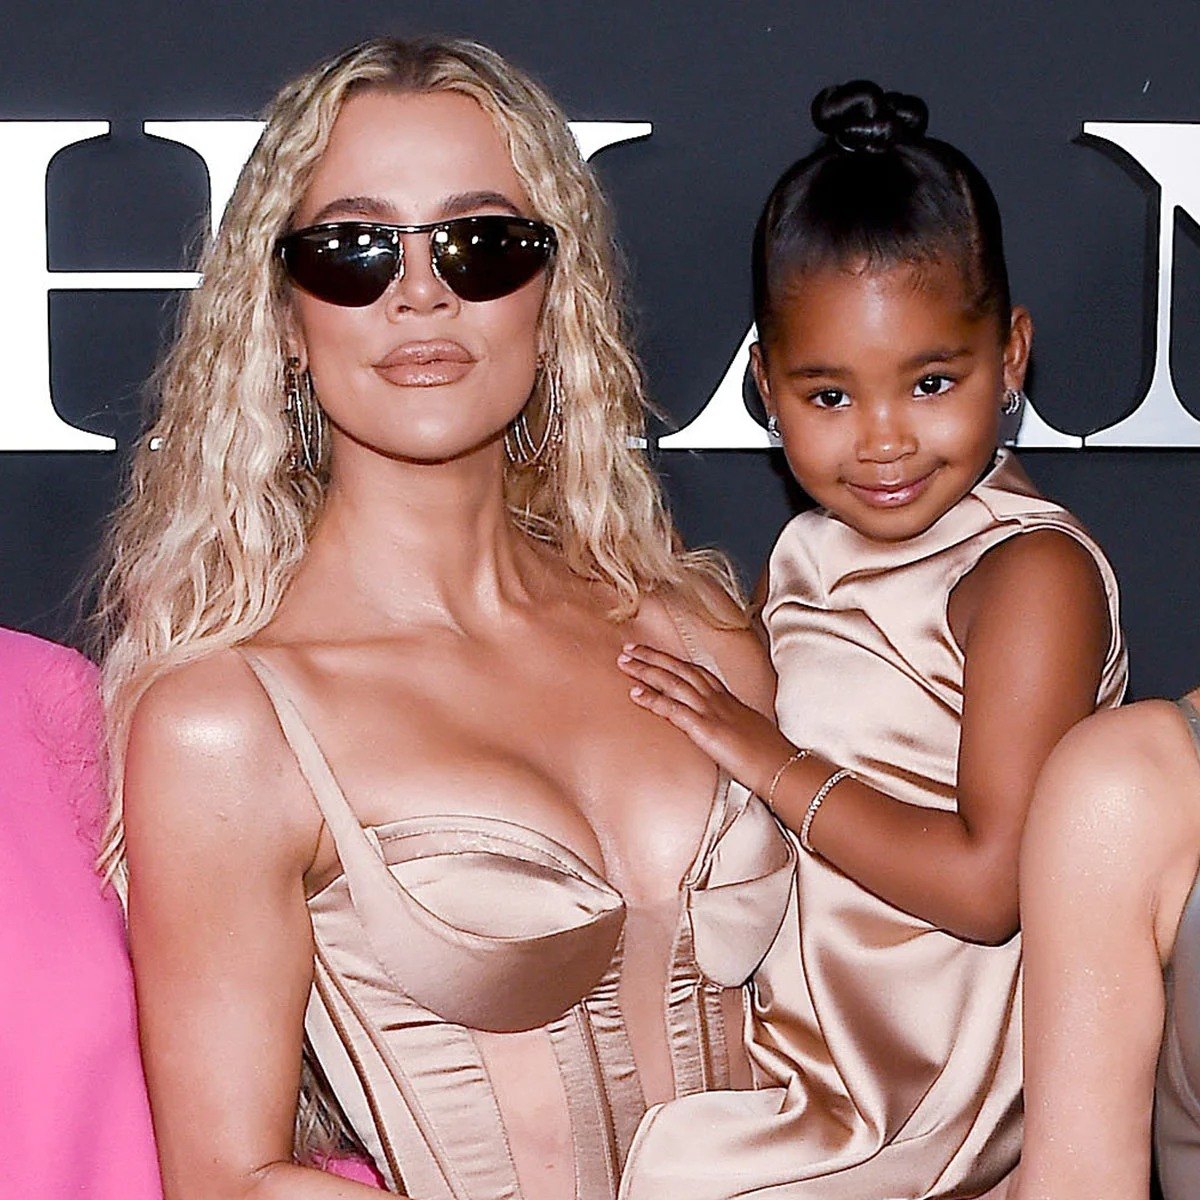 Khloe Kardashian's Cutest Moments With Her Kids: See Photos